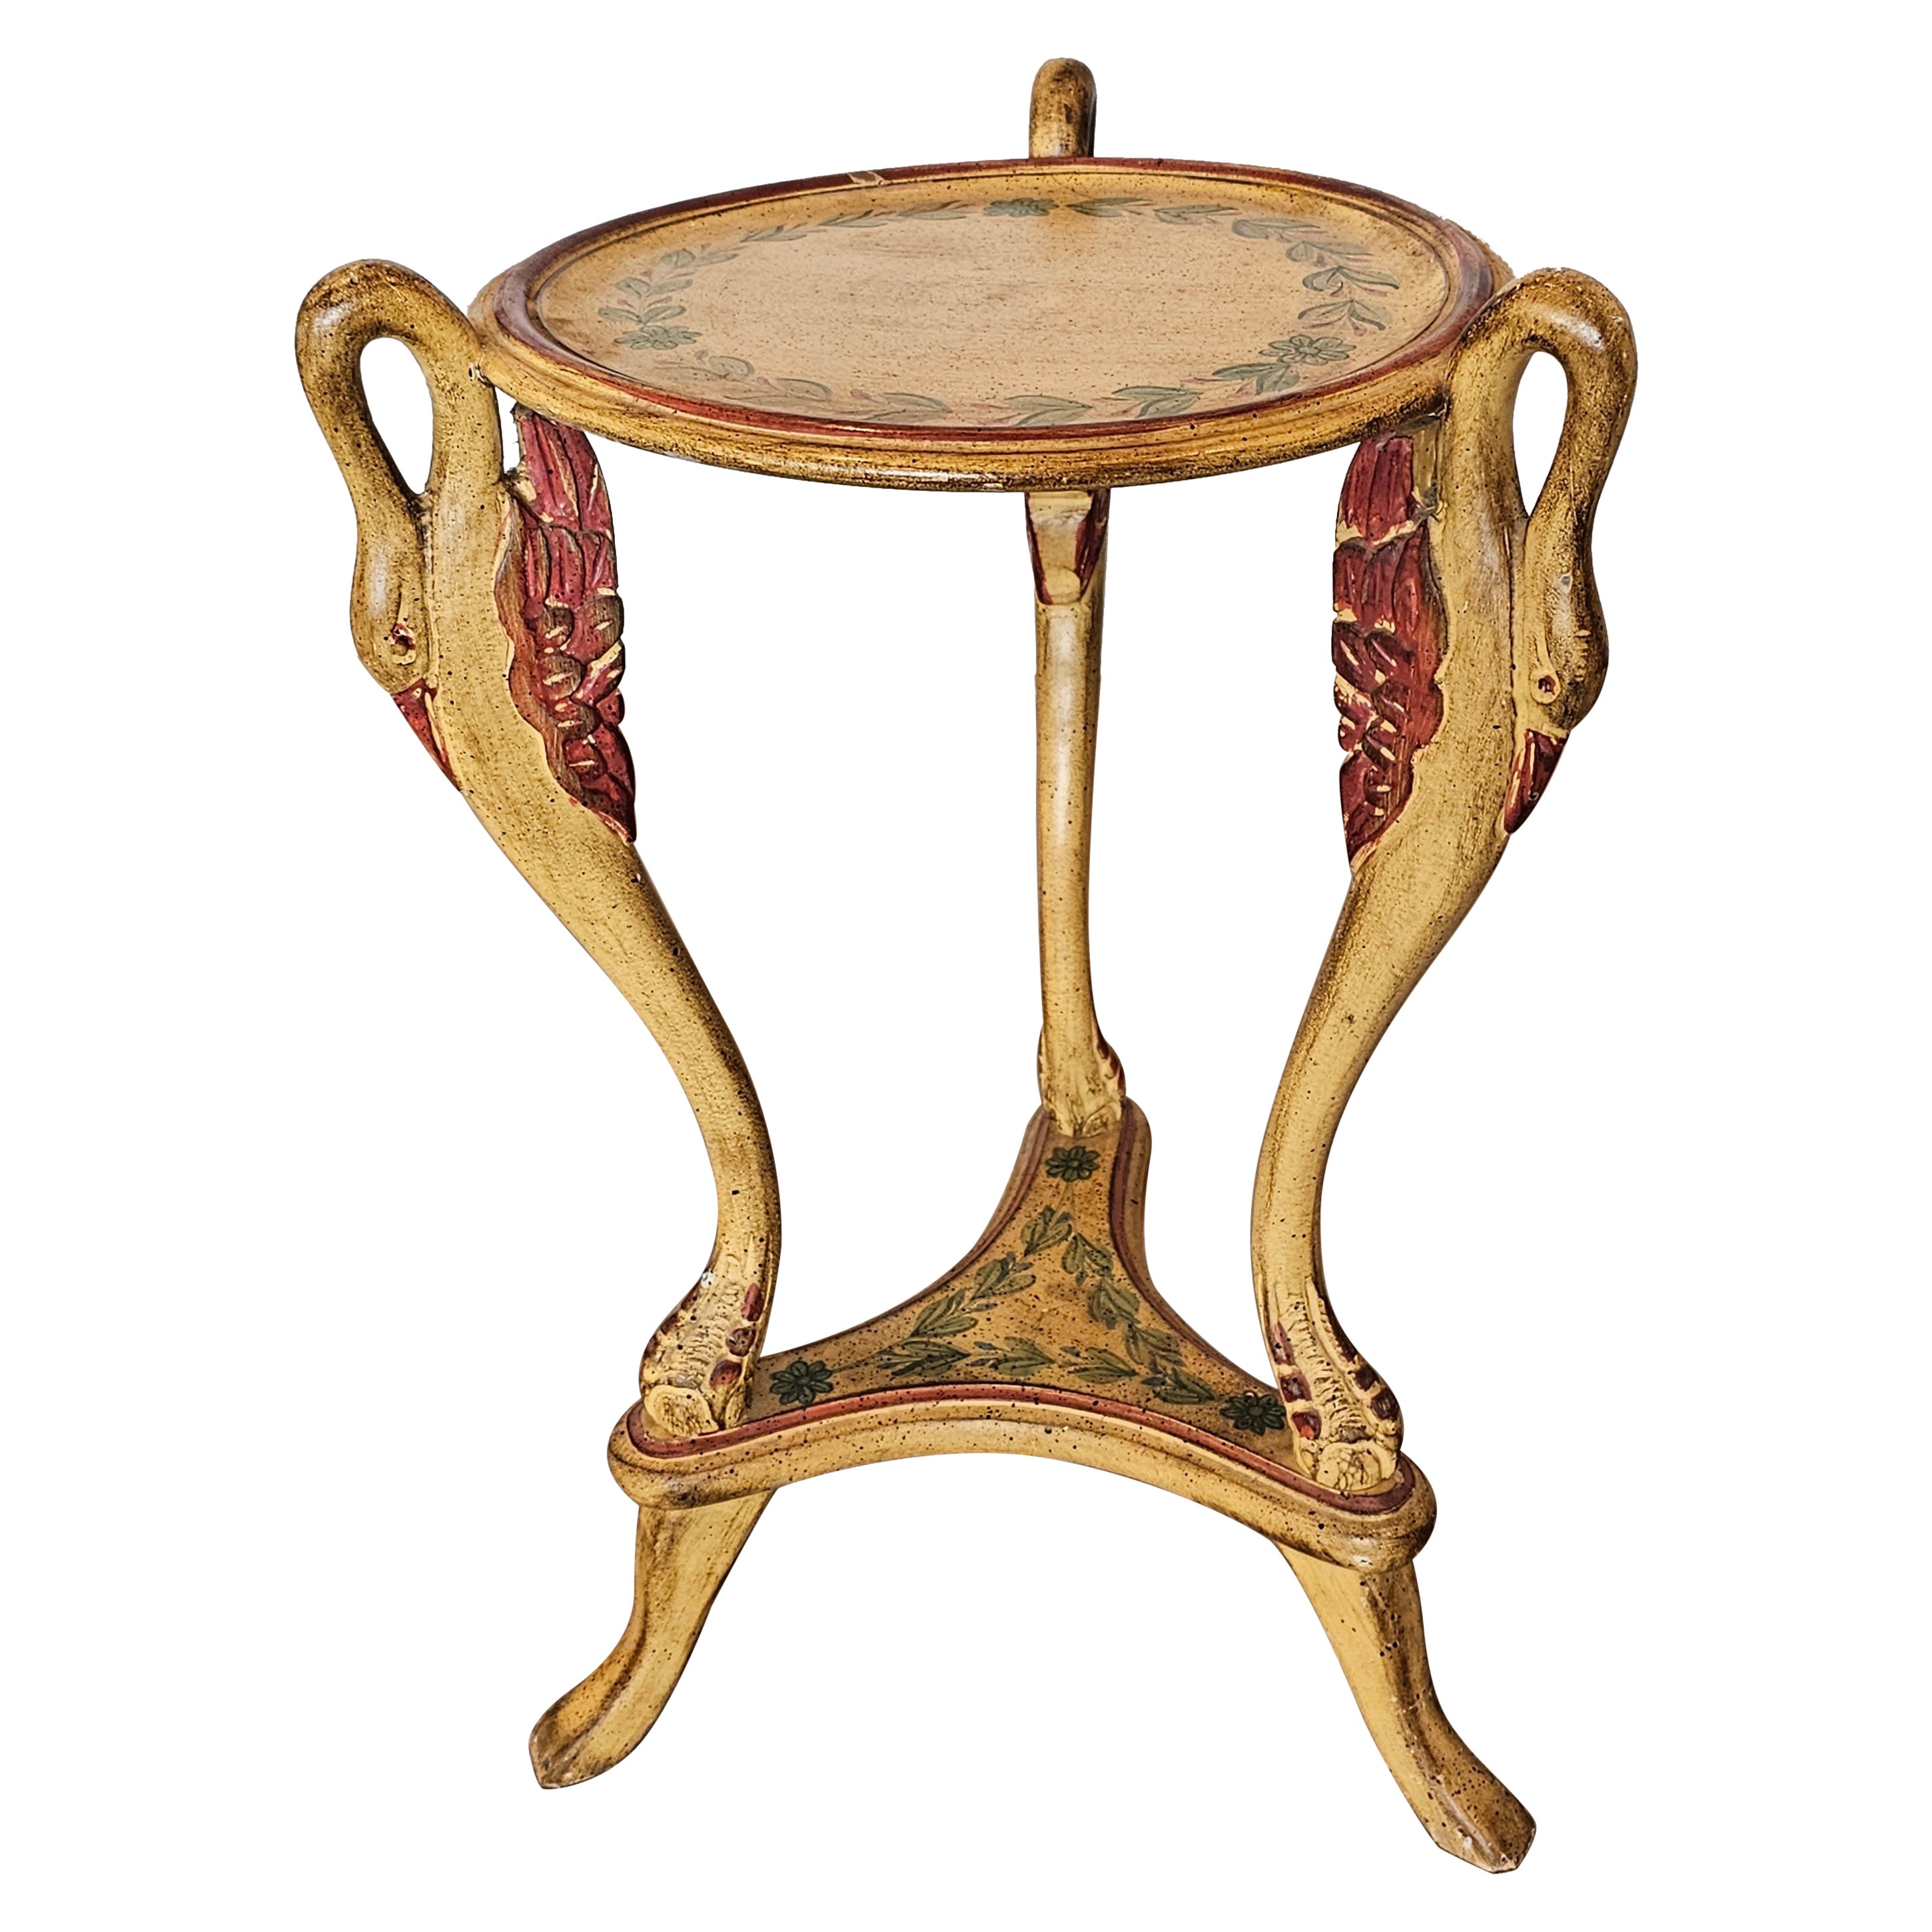 Vintage Neoclassical Revival Painted Swan Guéridon Table